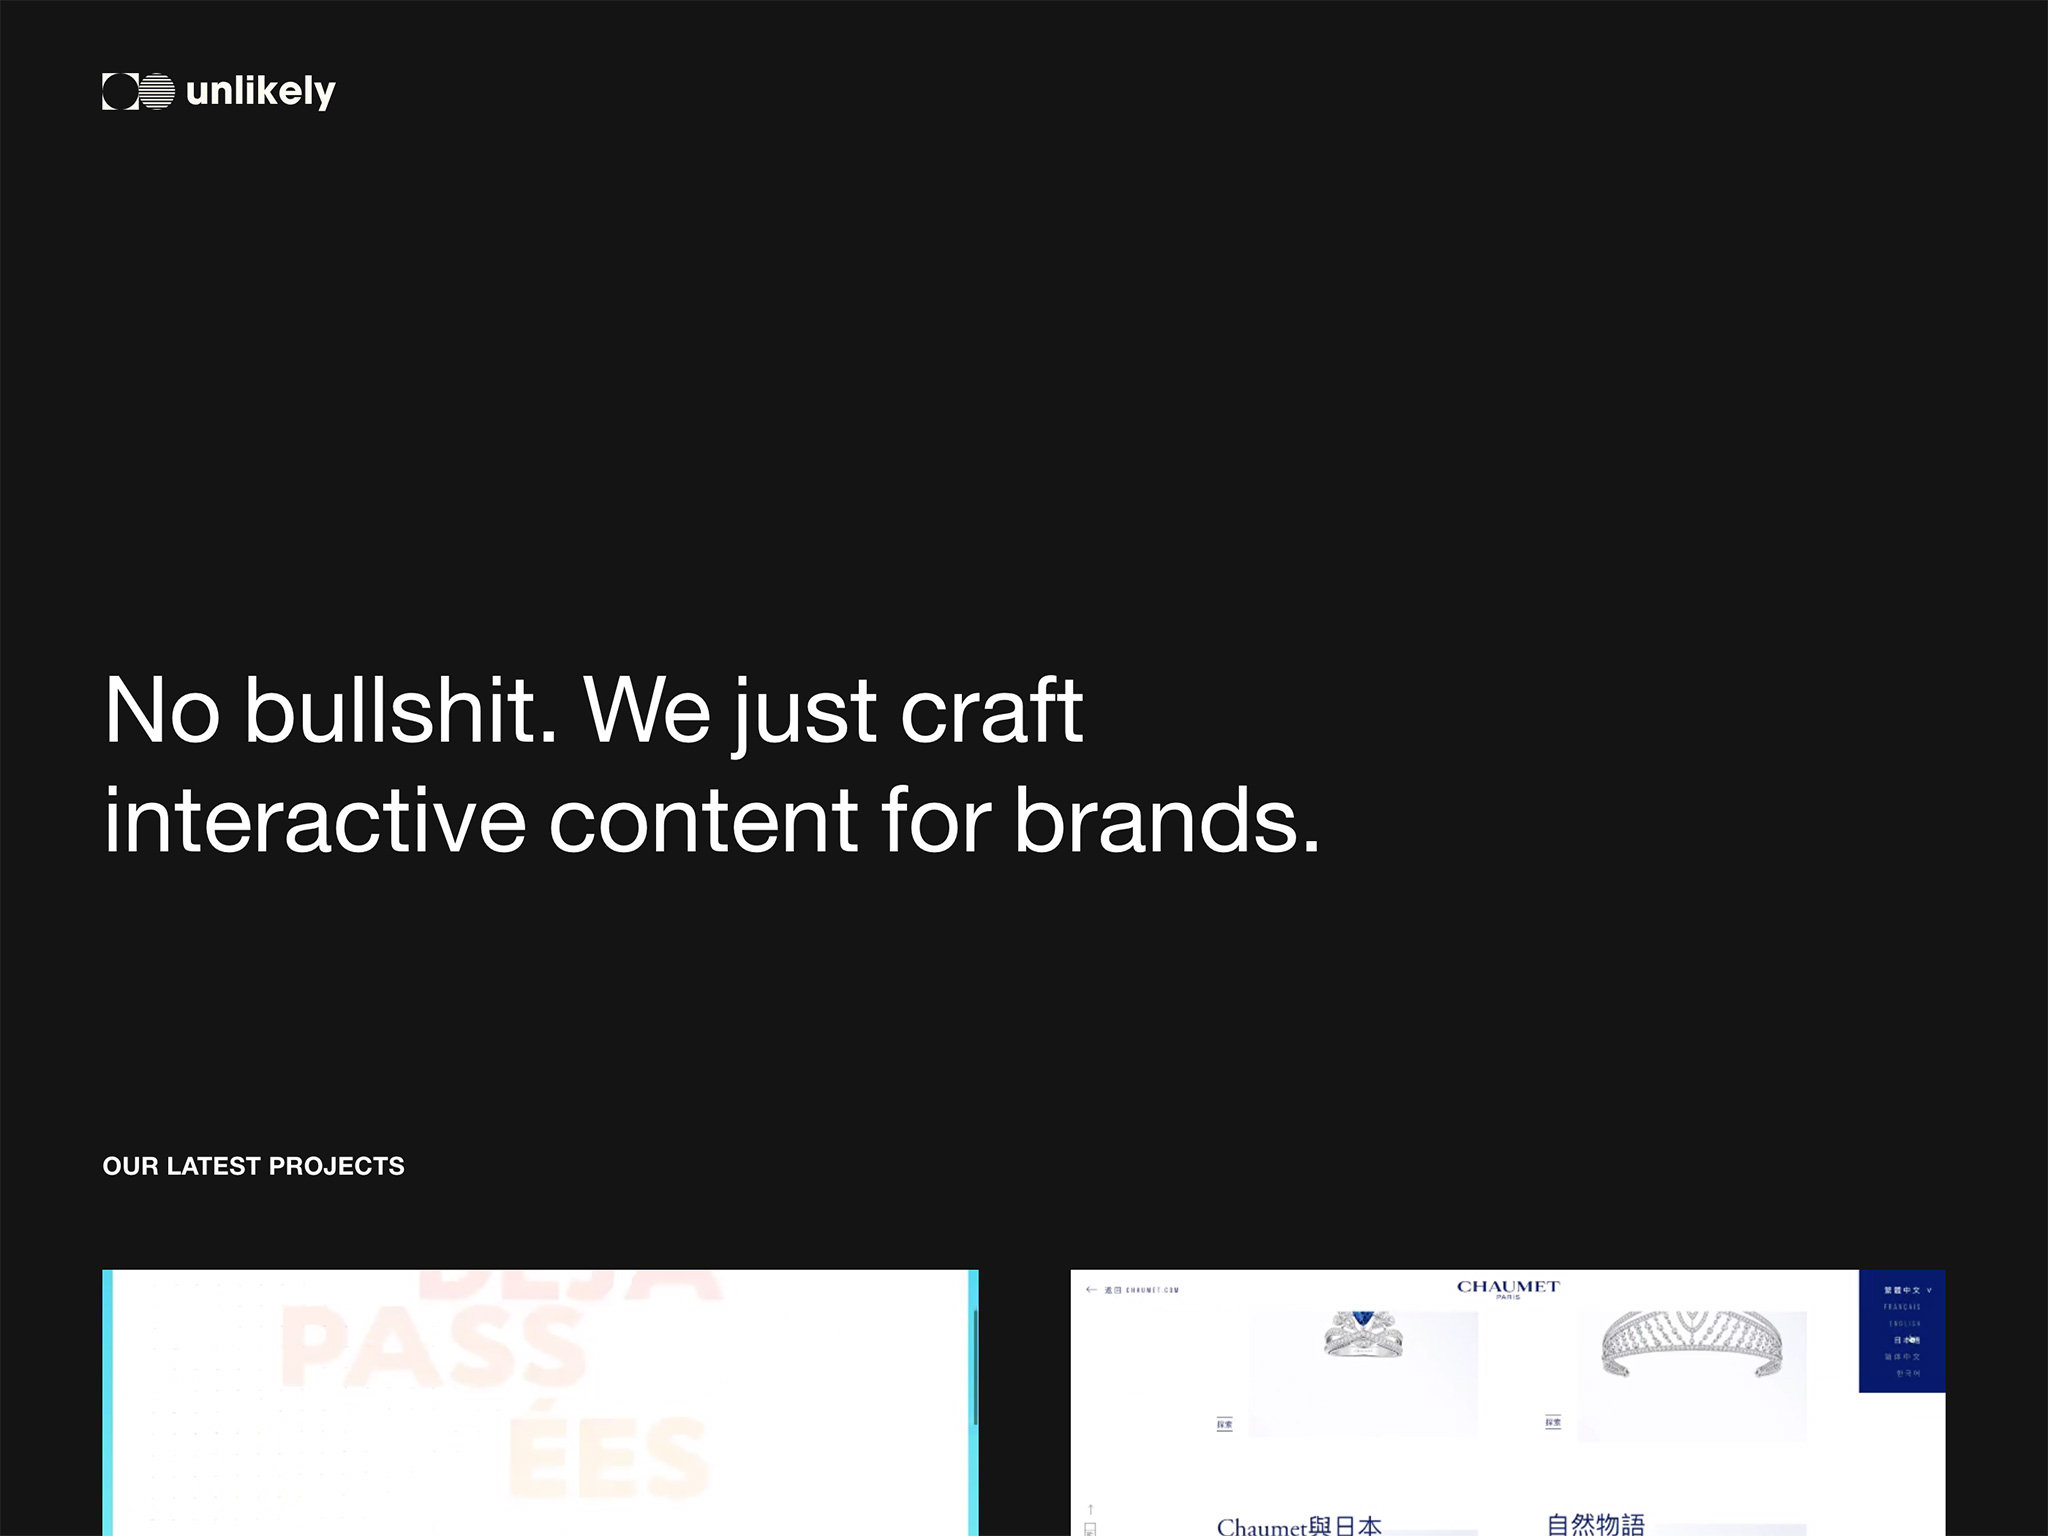 Unlikely - No bullshit. We just craft interactive and audiovisual content for brands.